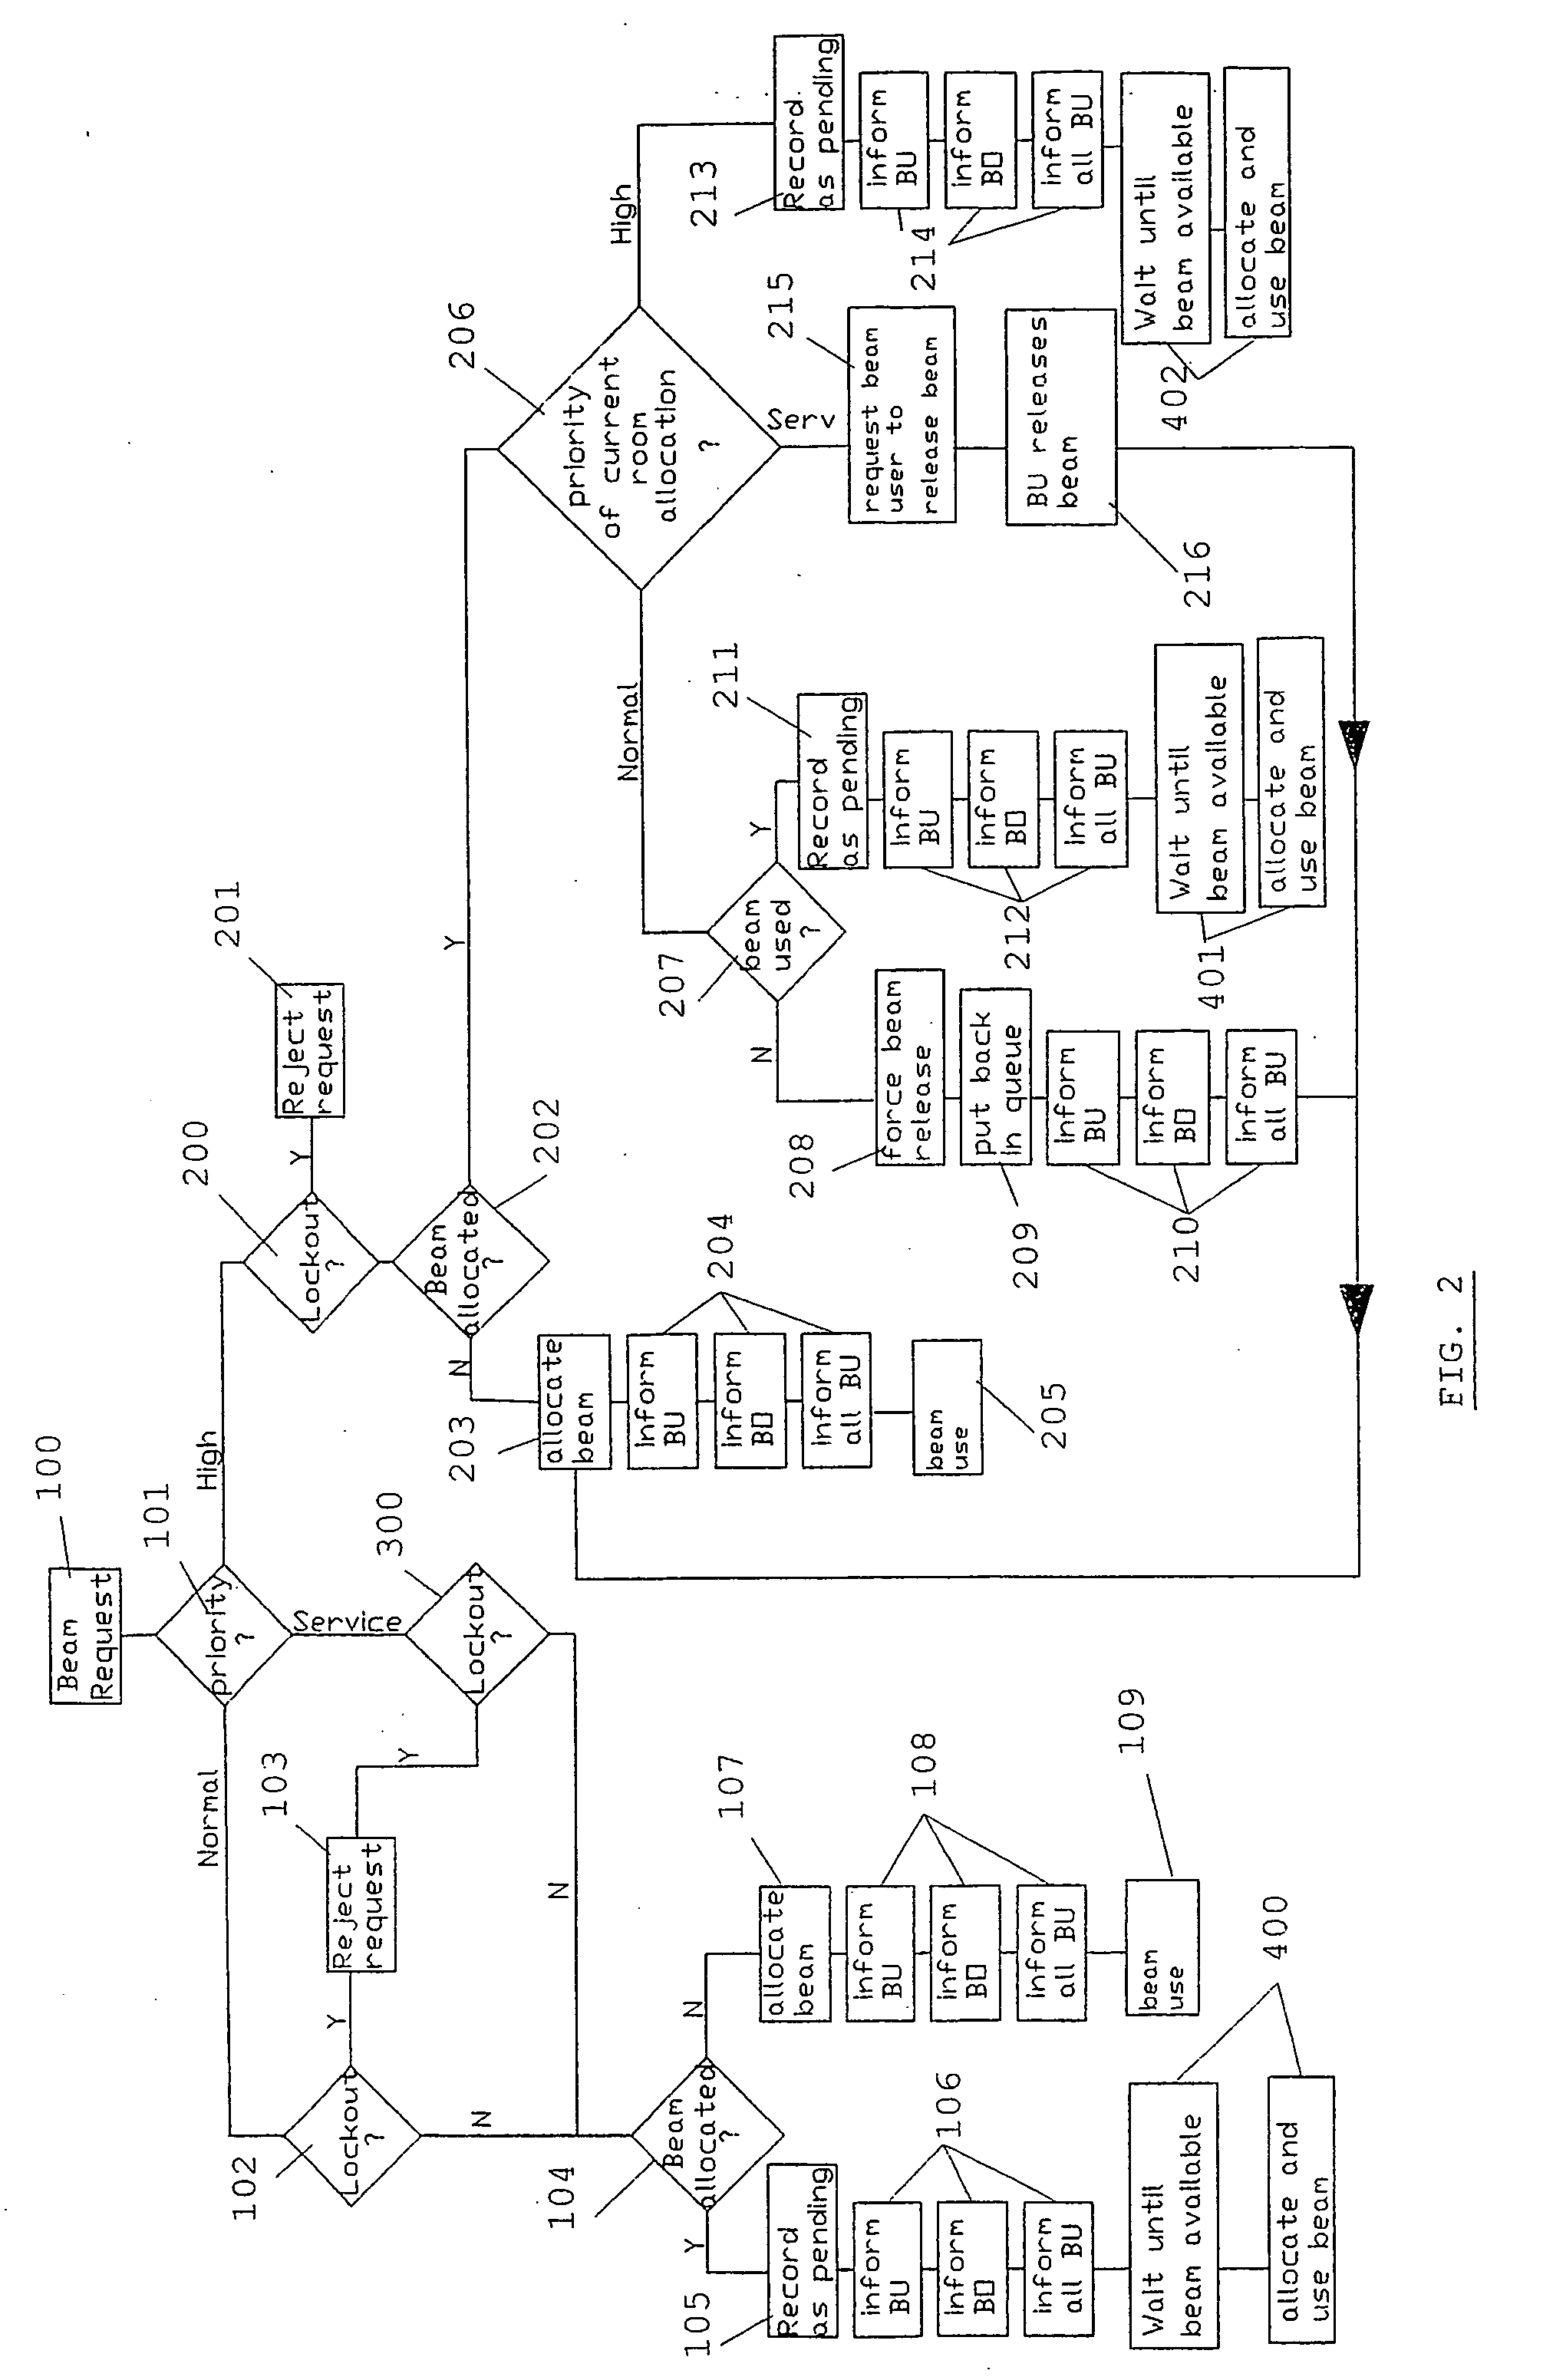 Method and system for automatic beam allocation in a multi-room particle beam treatment facility